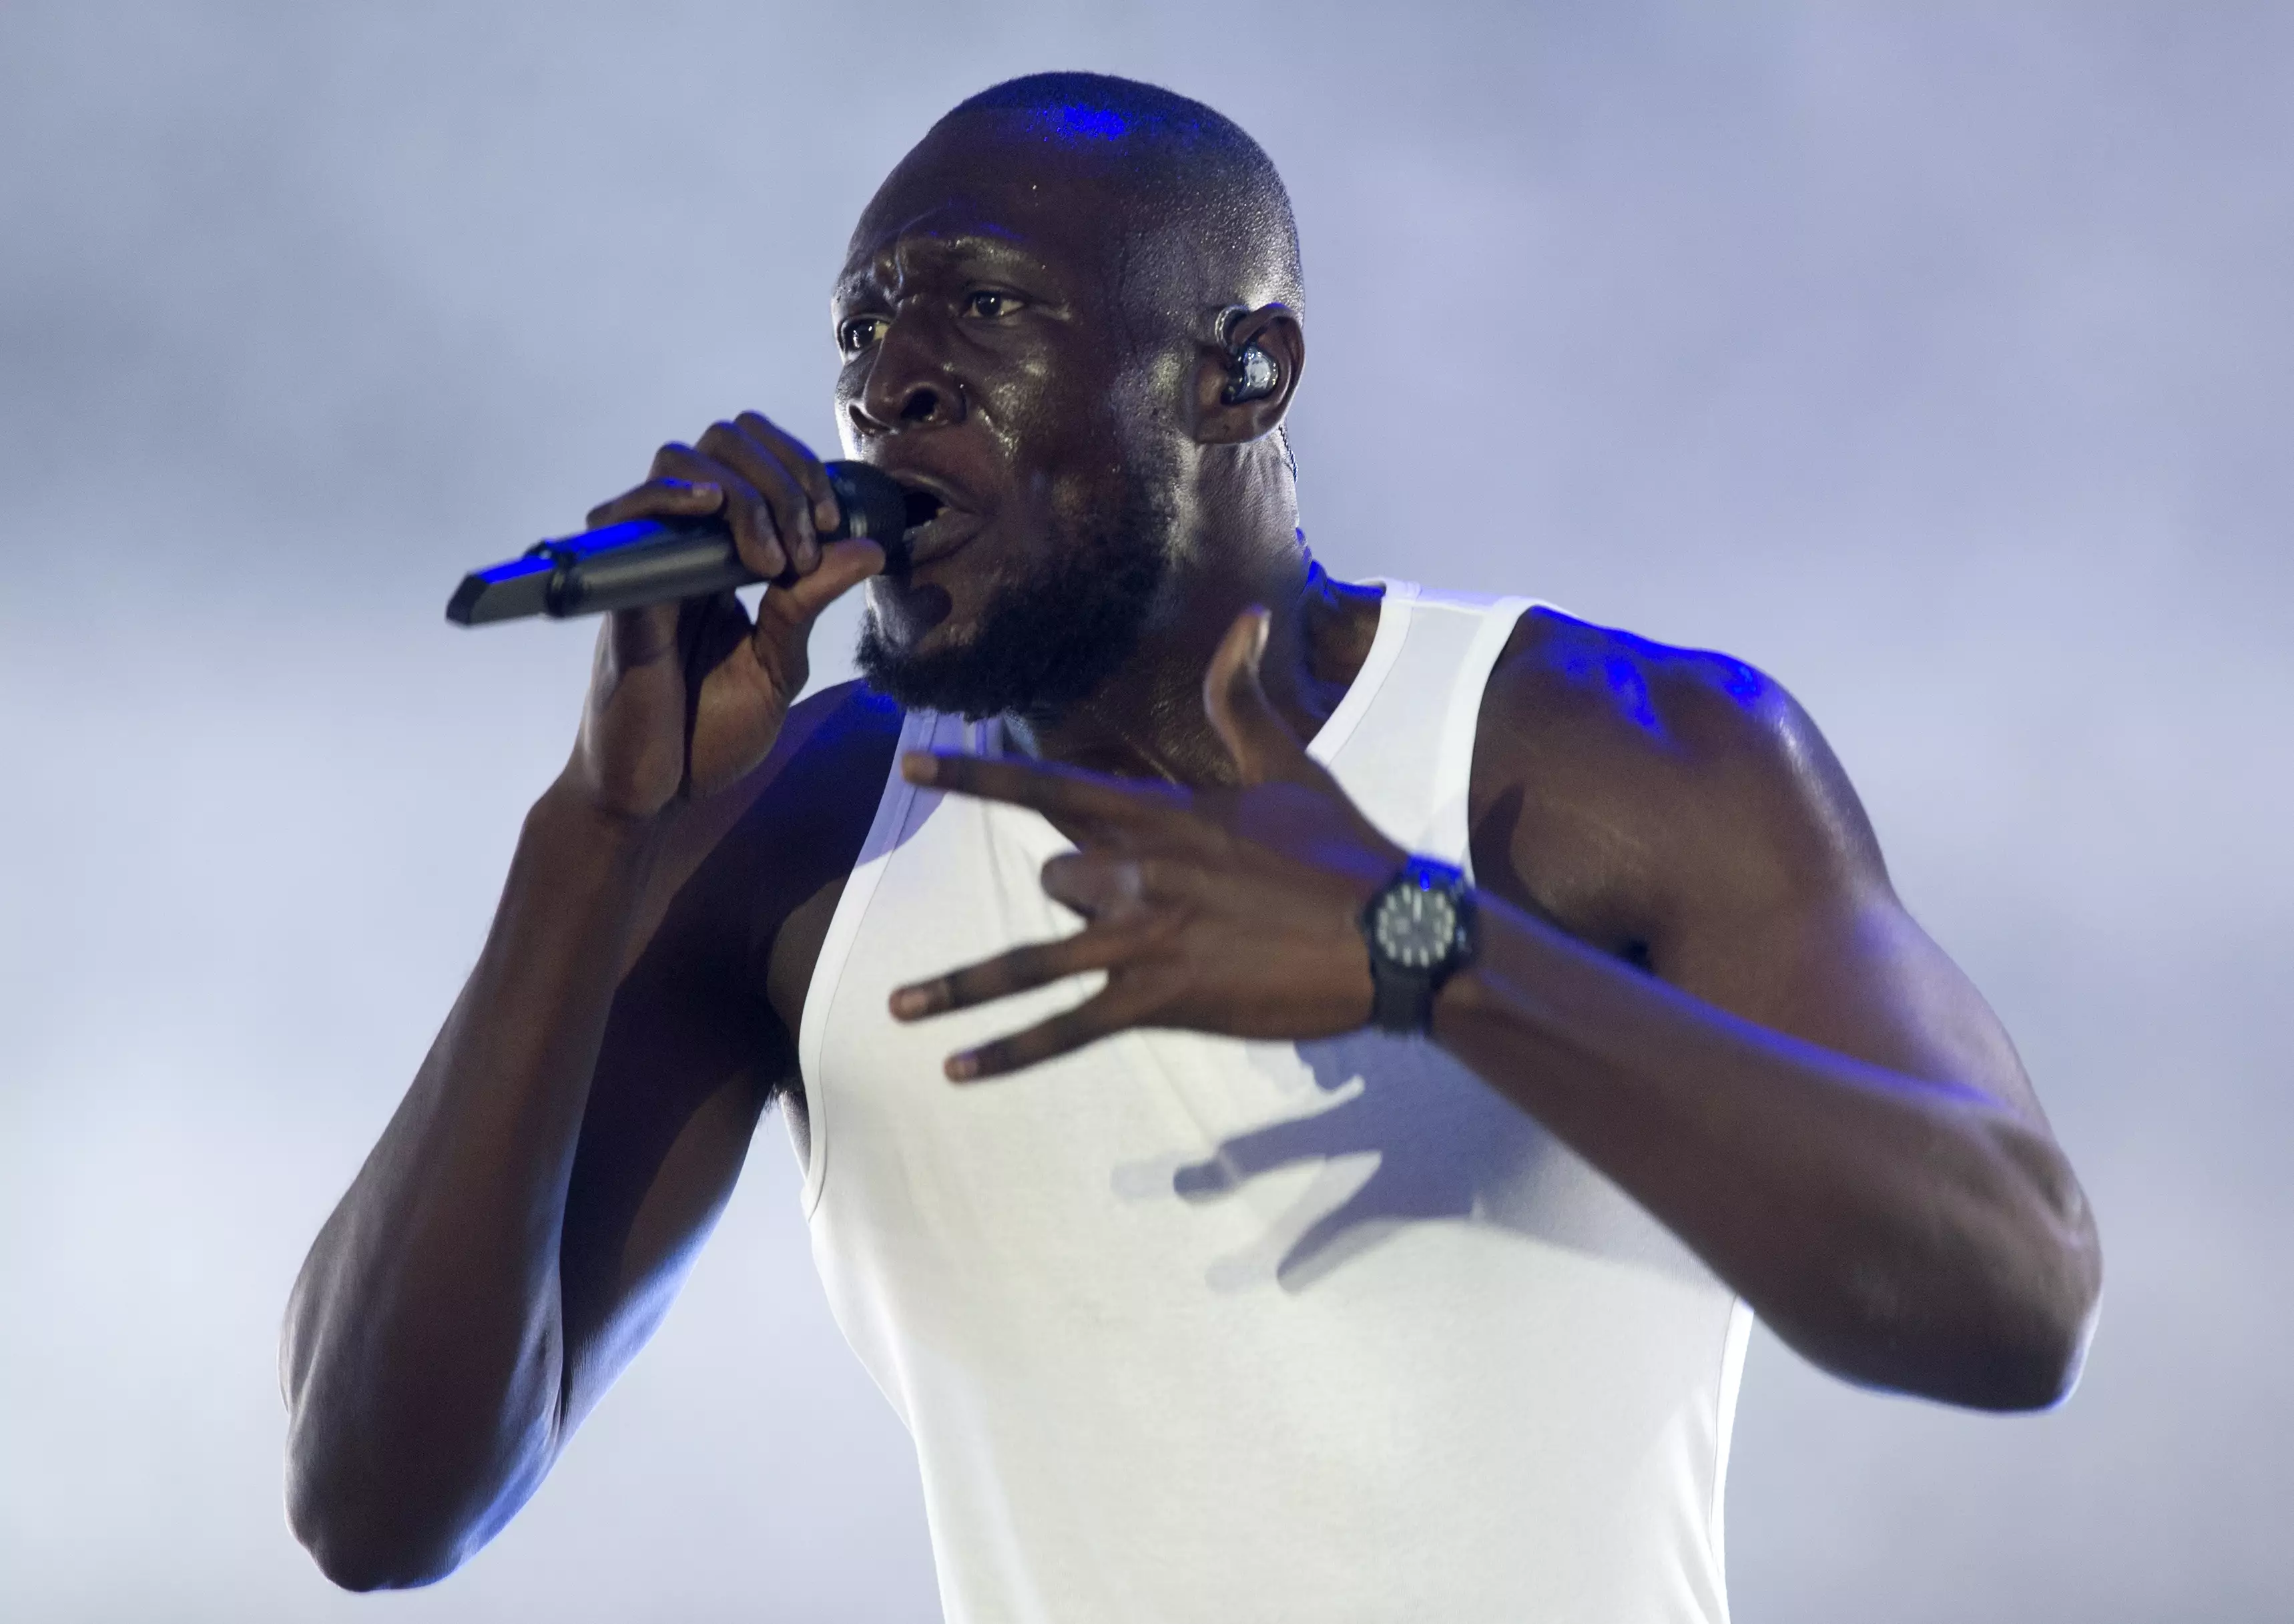 Stormzy opened up about the break-up in his recent song, 'Lessons' (